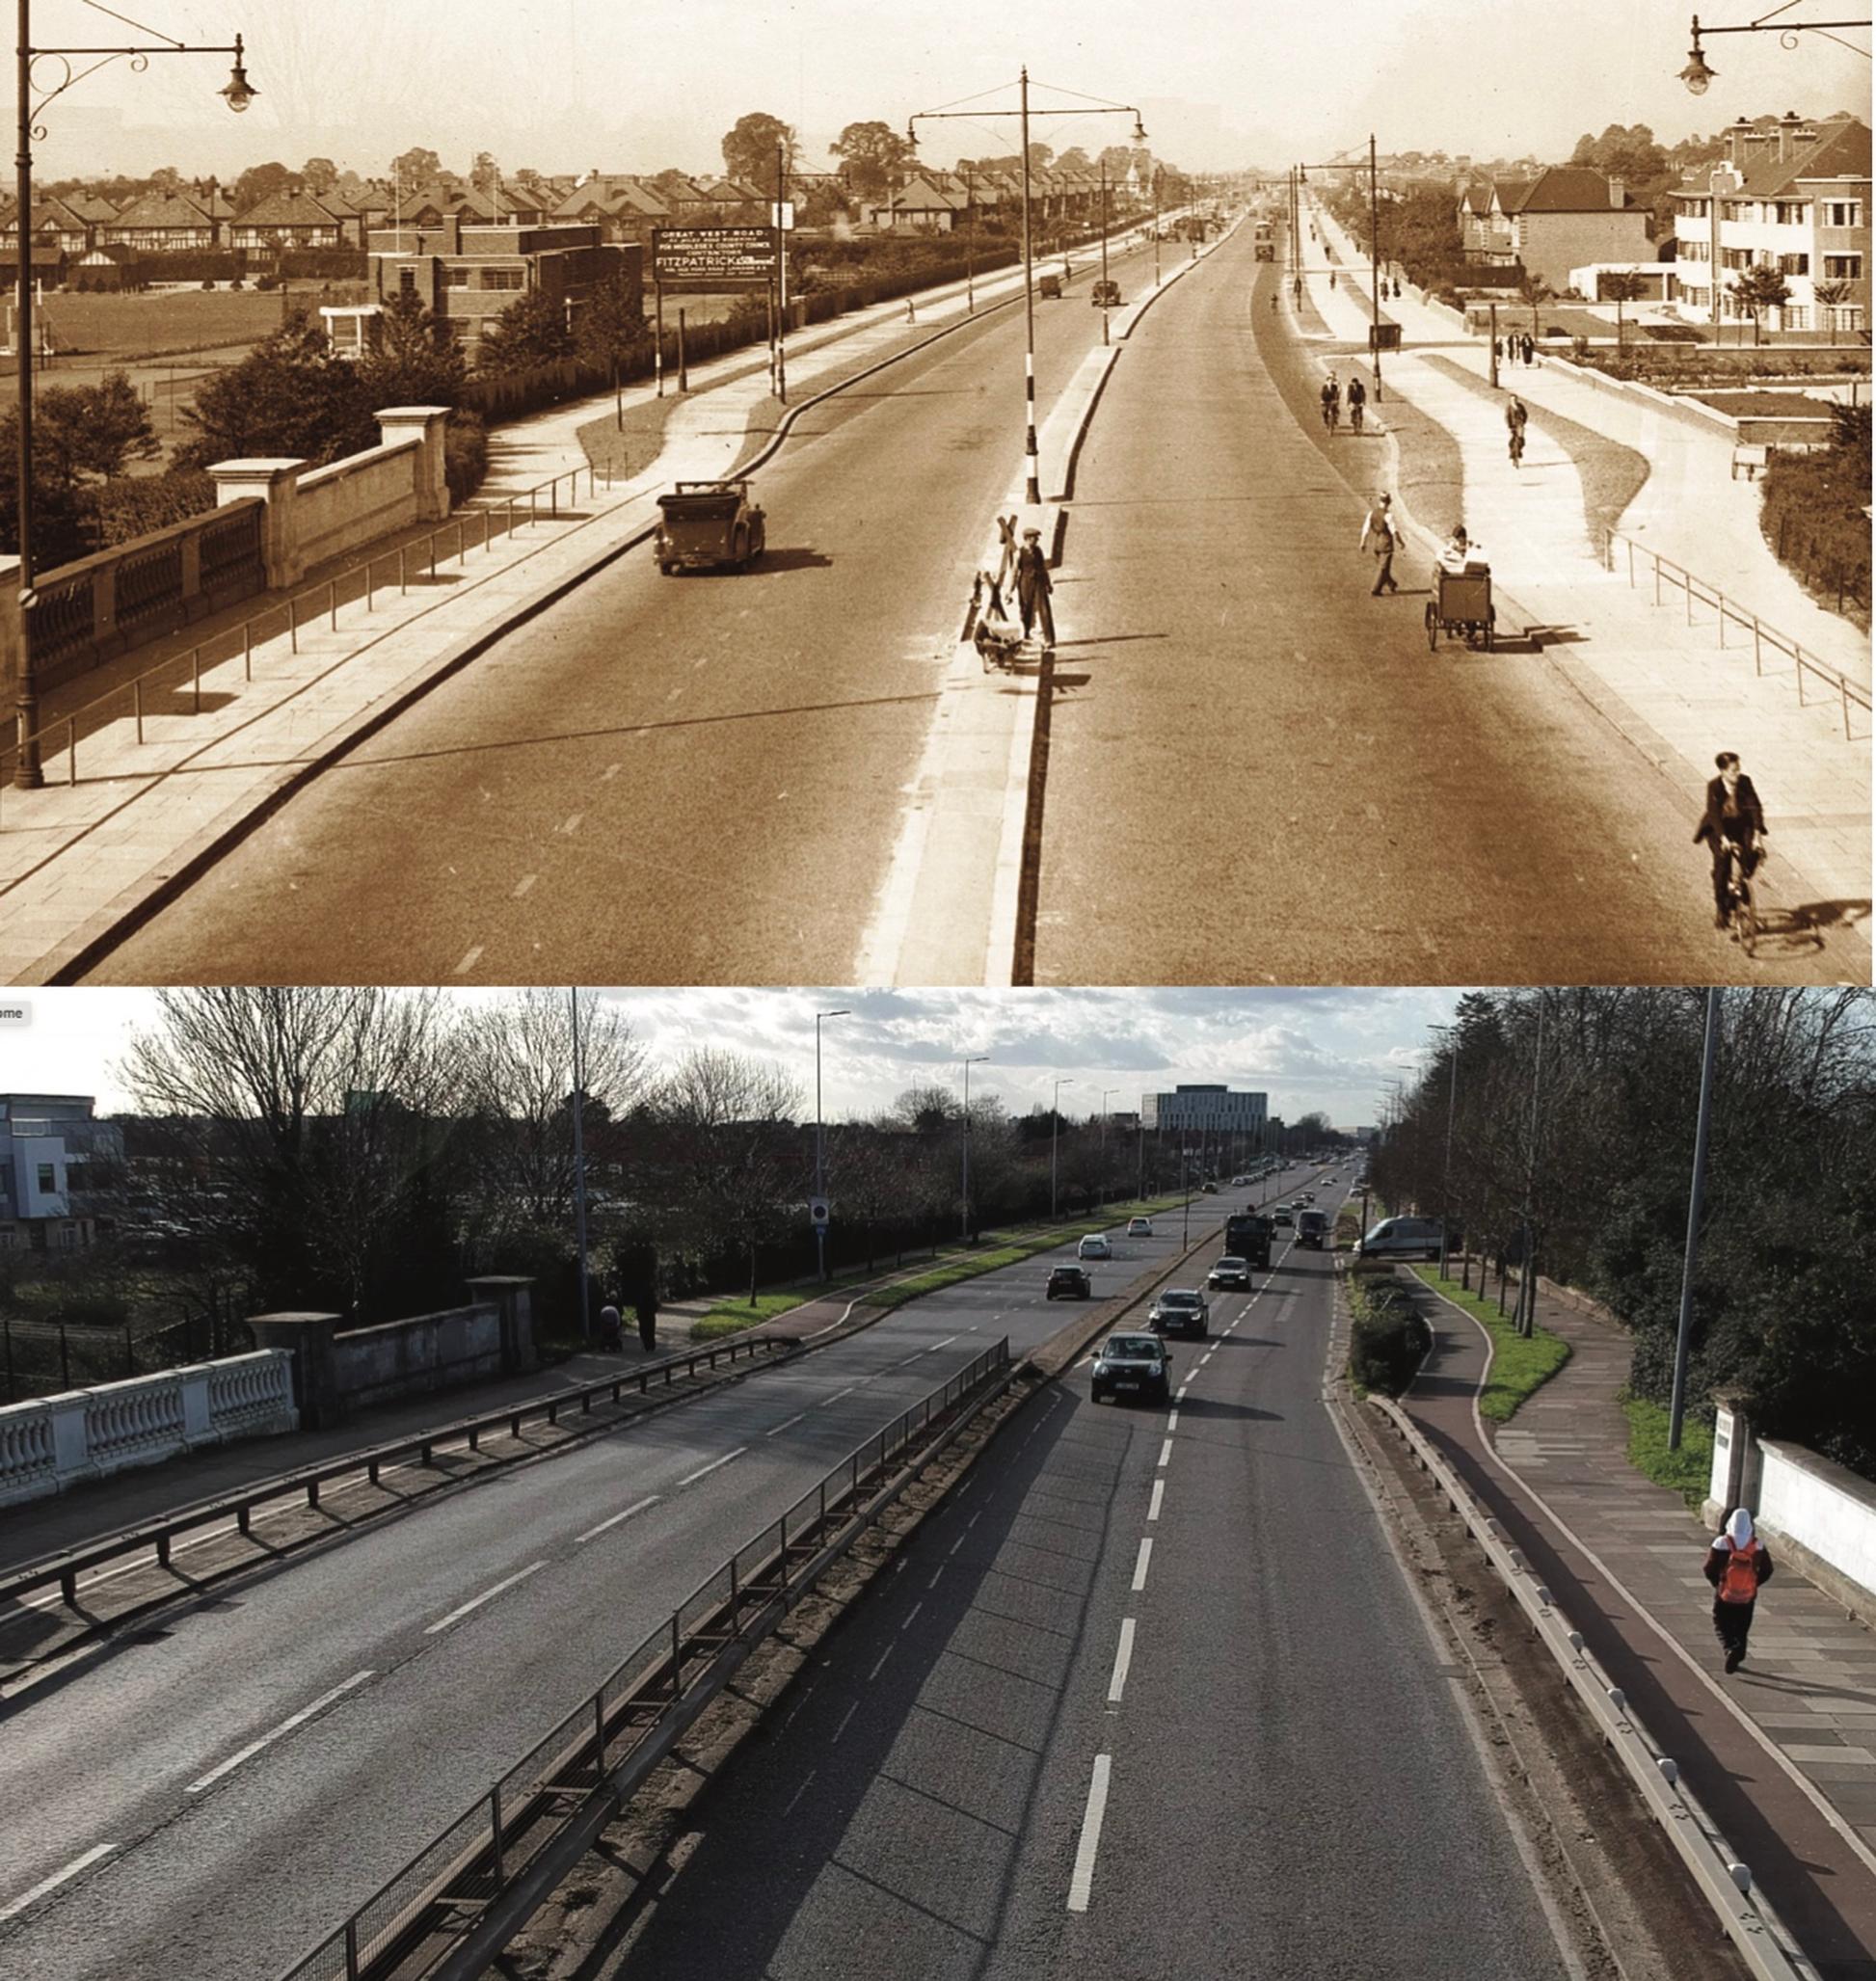 A pair of cycleways on the new A4 Great West Road in West London in the 1930s and the same location today